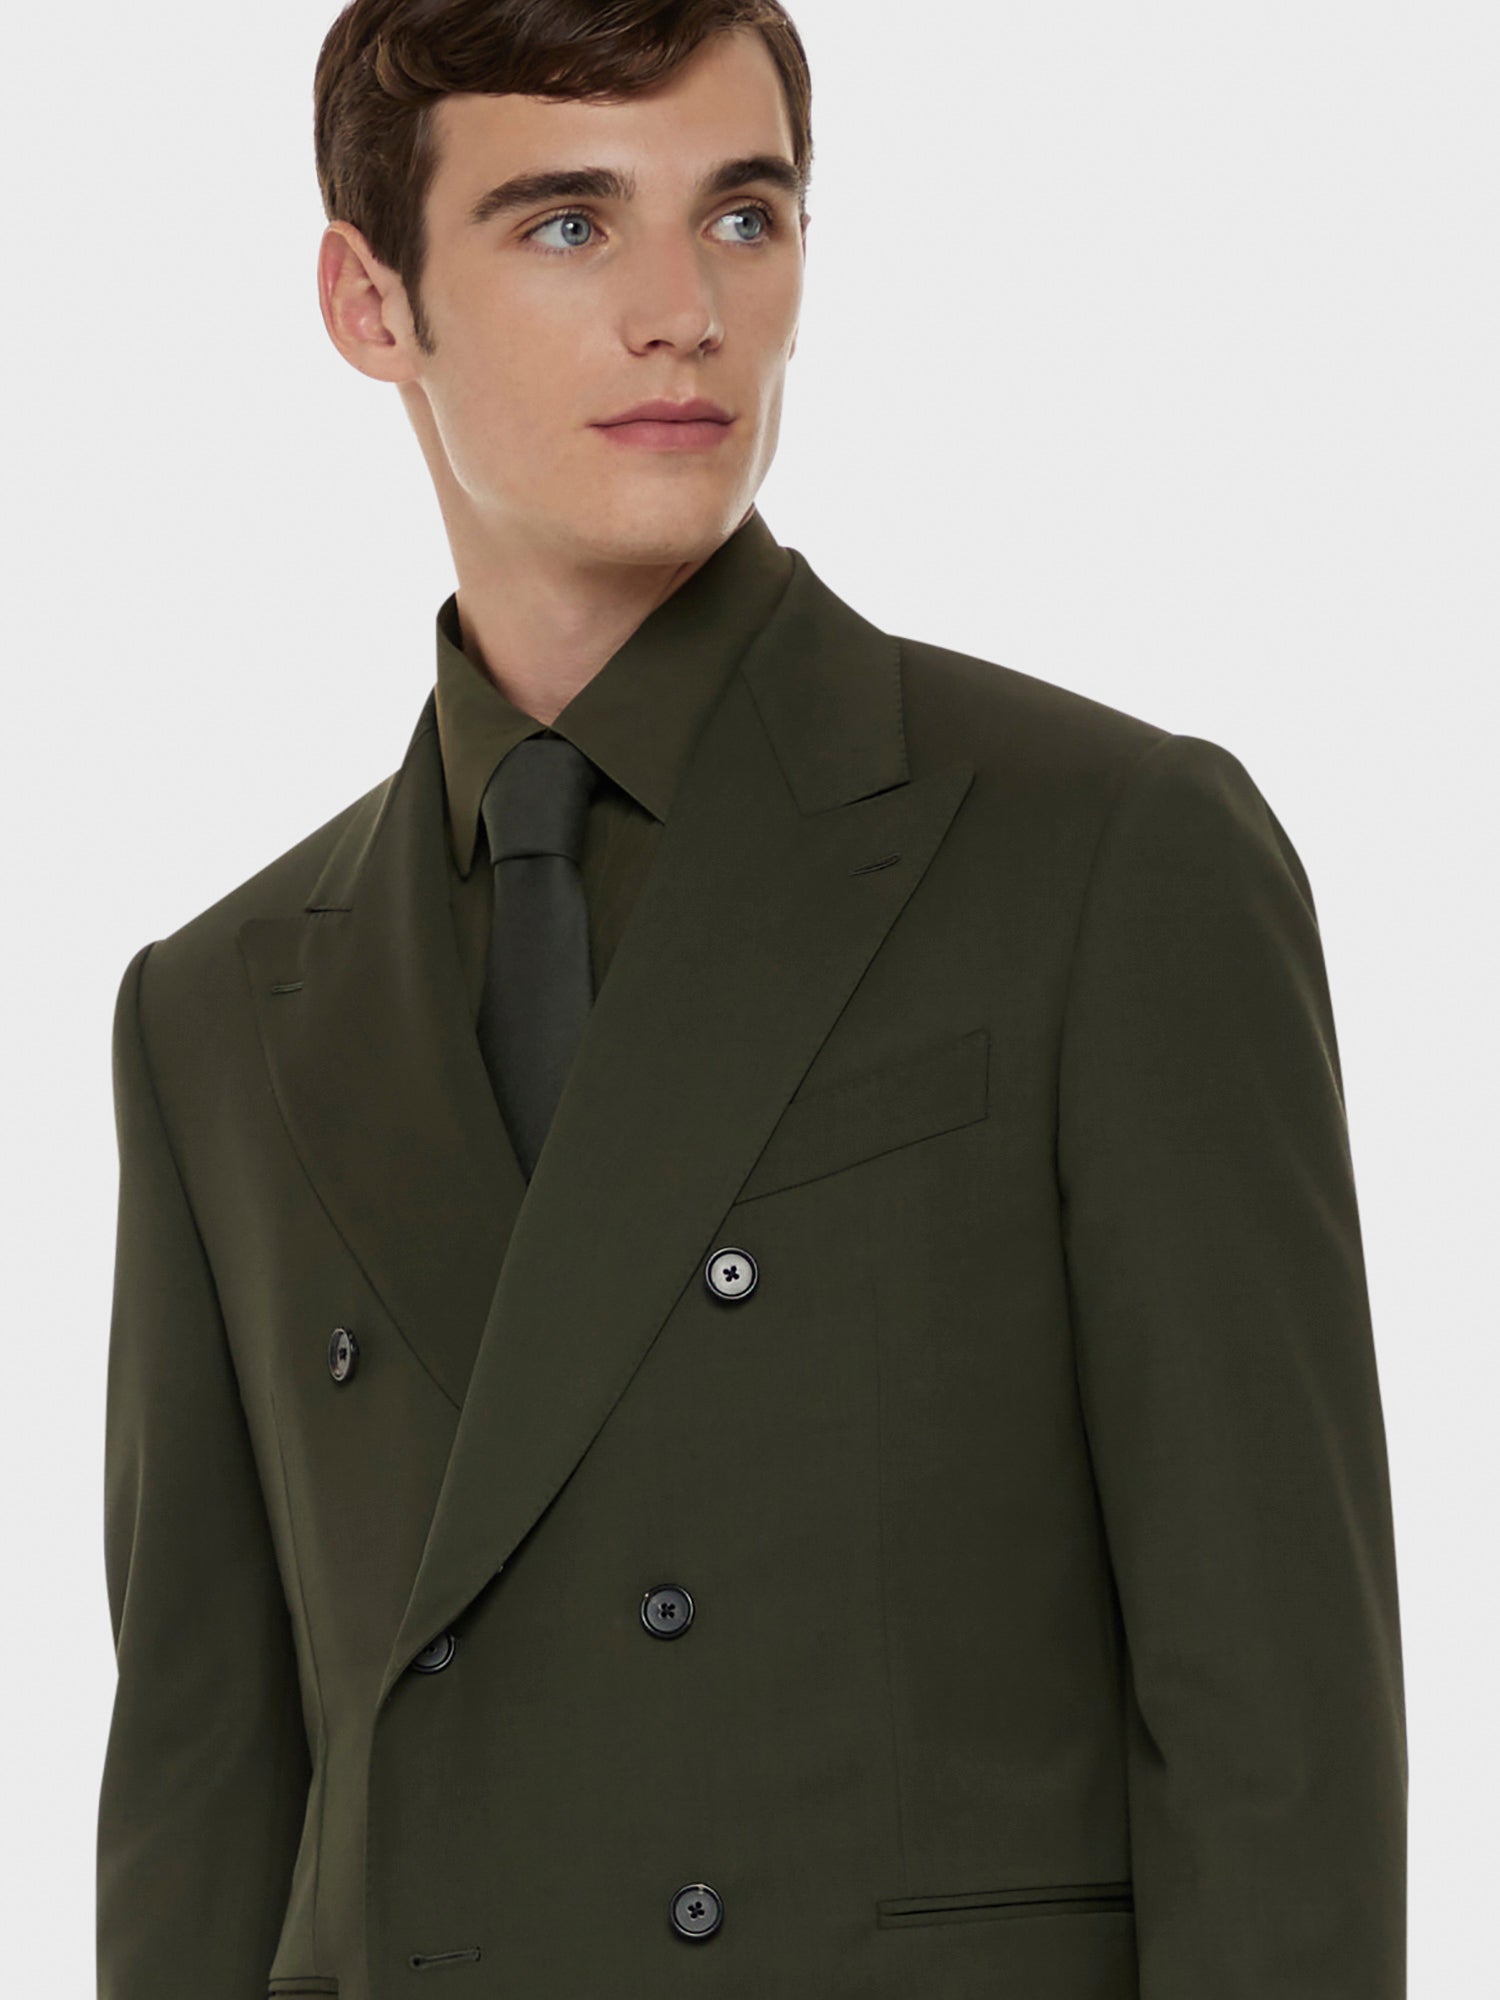 Caruso - Norma double-breasted suit in technical green wool